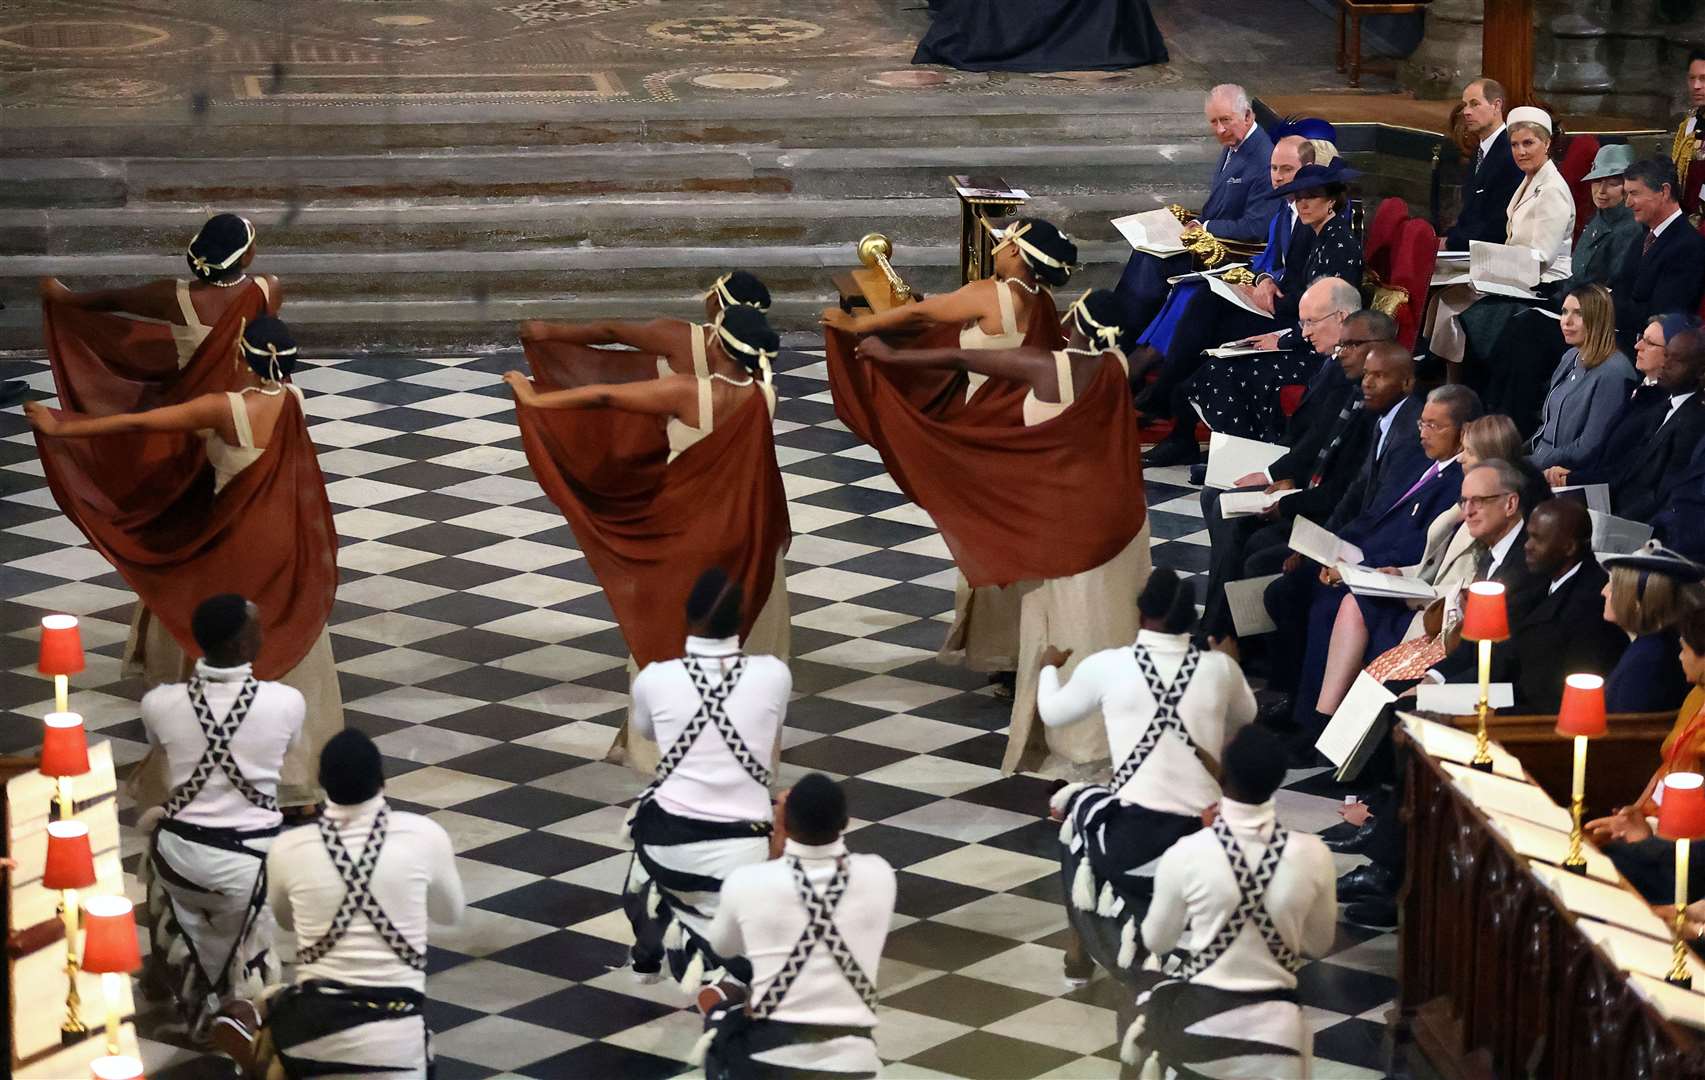 Members of the Royal family watch dancers perform, as they attend the annual Commonwealth Day Service at Westminster Abbey in London (Hannah McKay/PA)